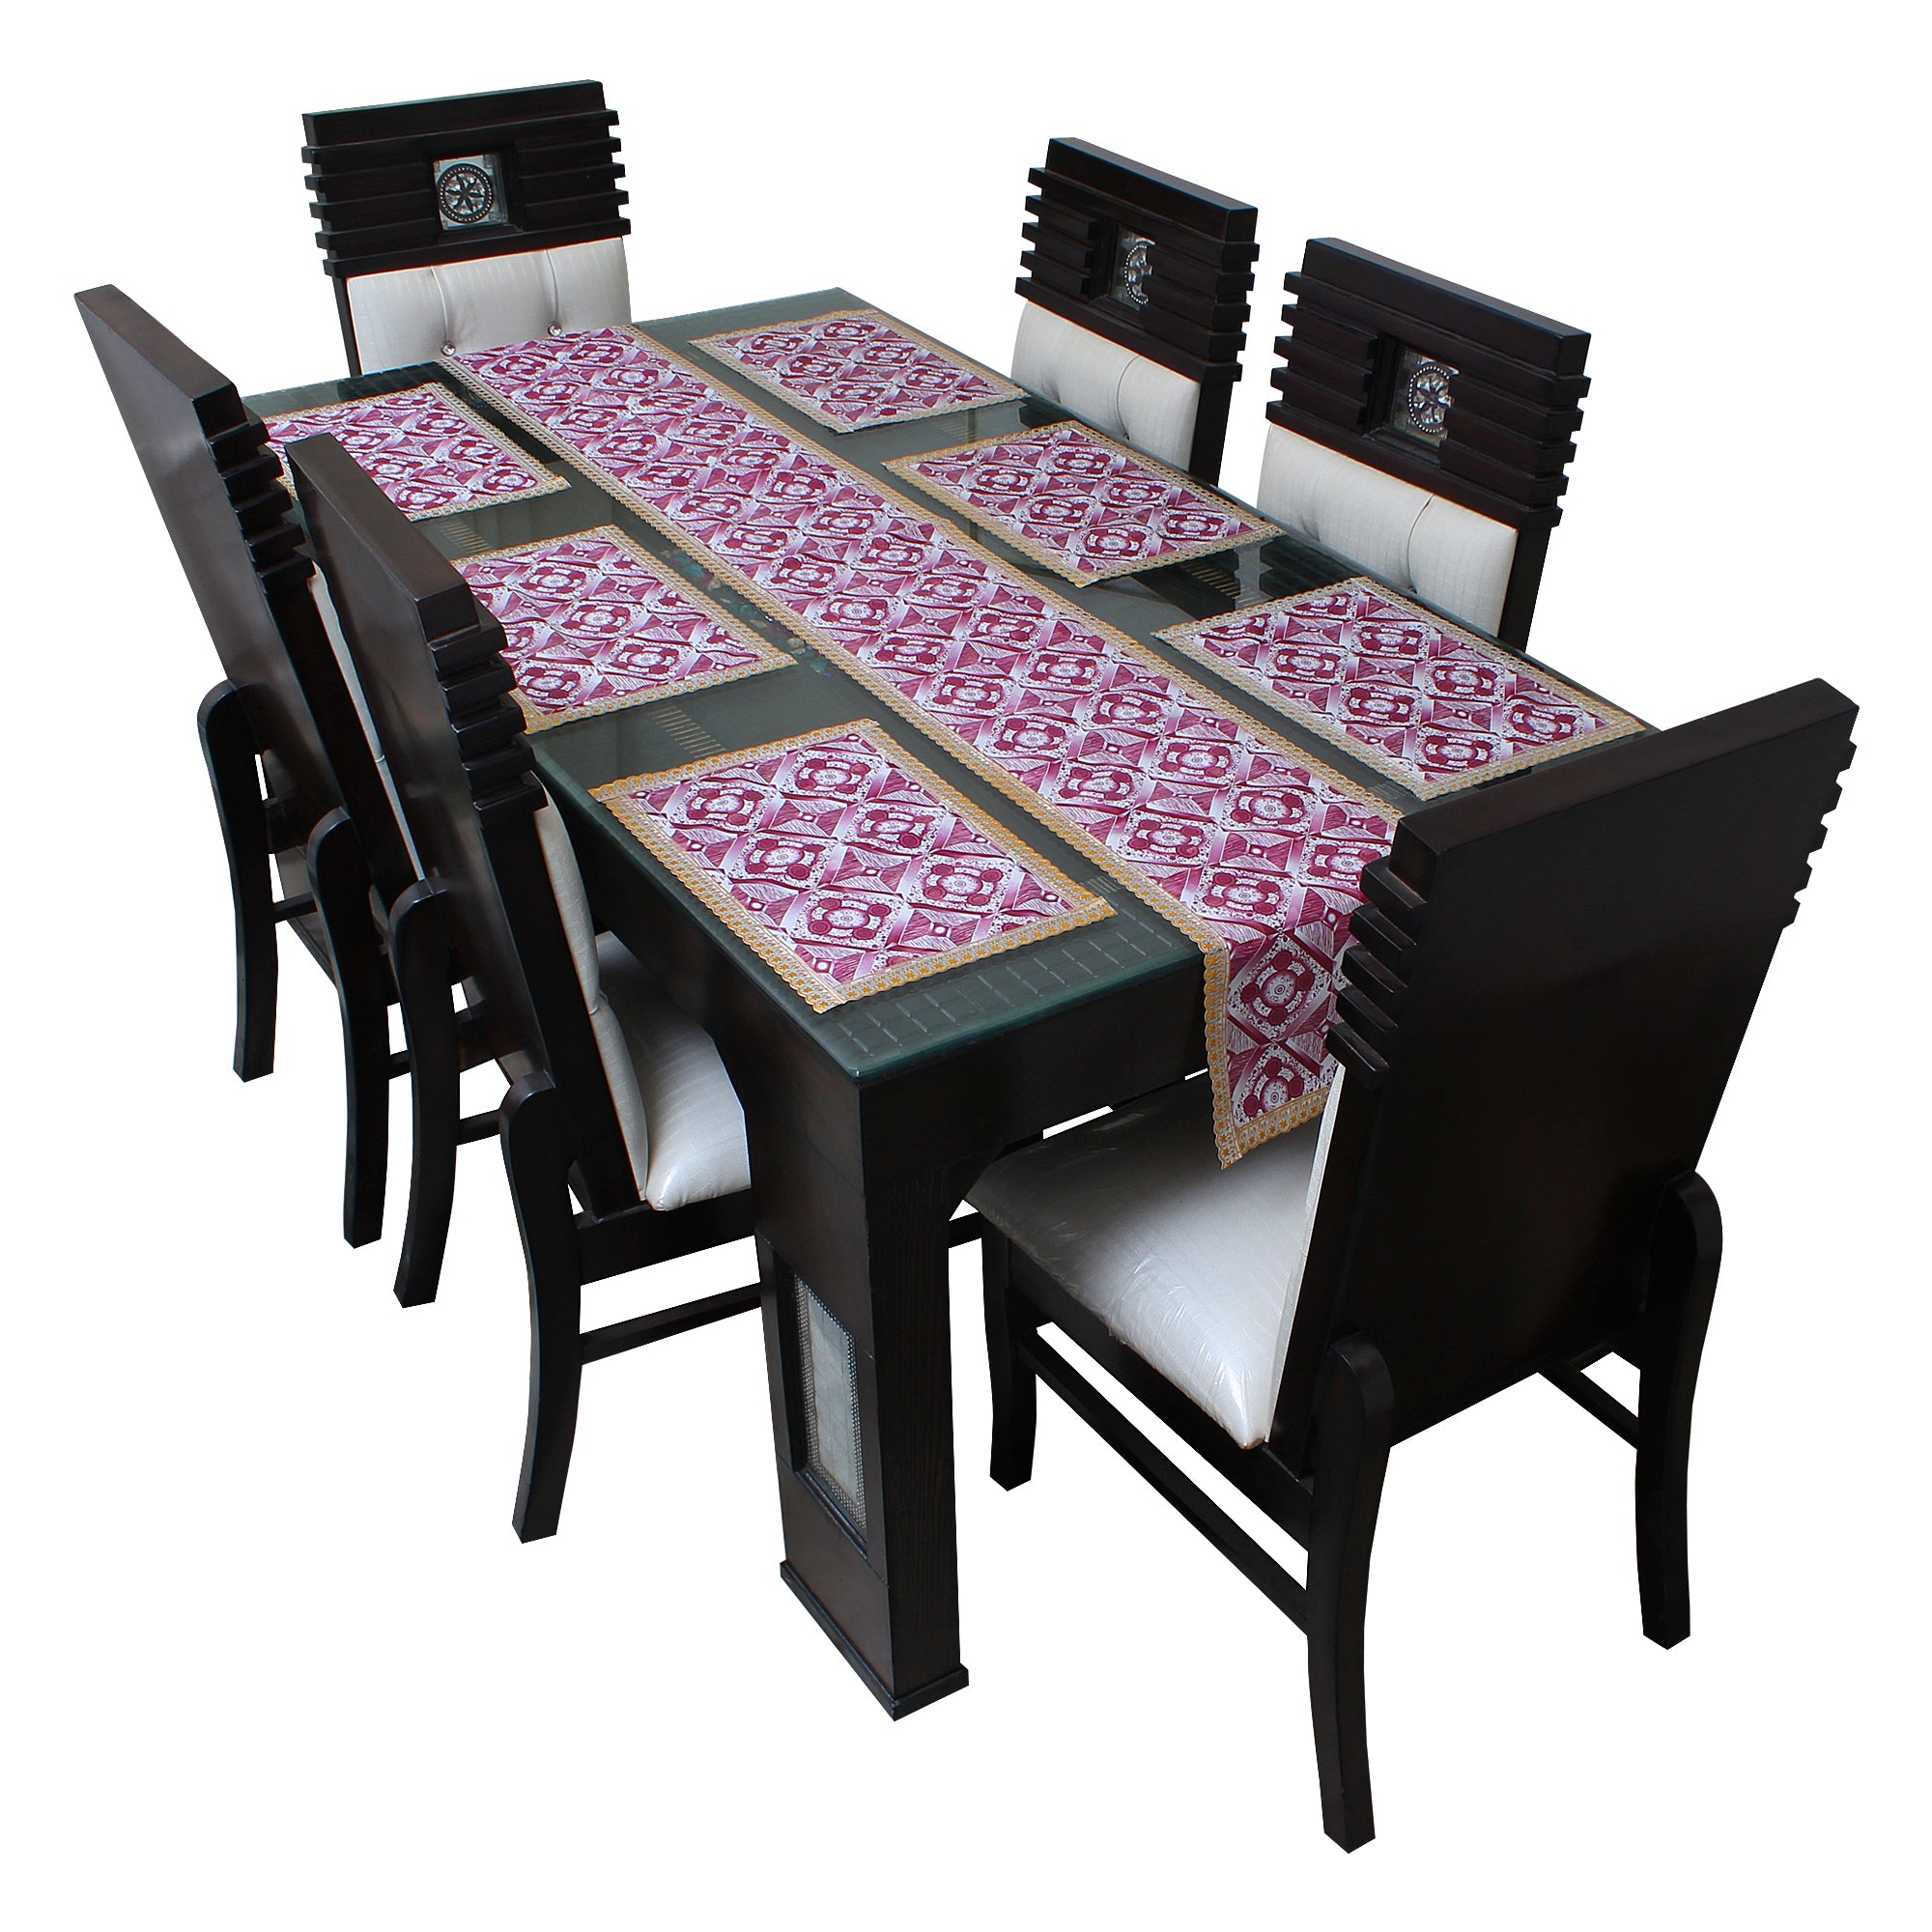 Waterproof & Dustproof Dining Table Runner With 6 Placemats, SA55 - Dream Care Furnishings Private Limited